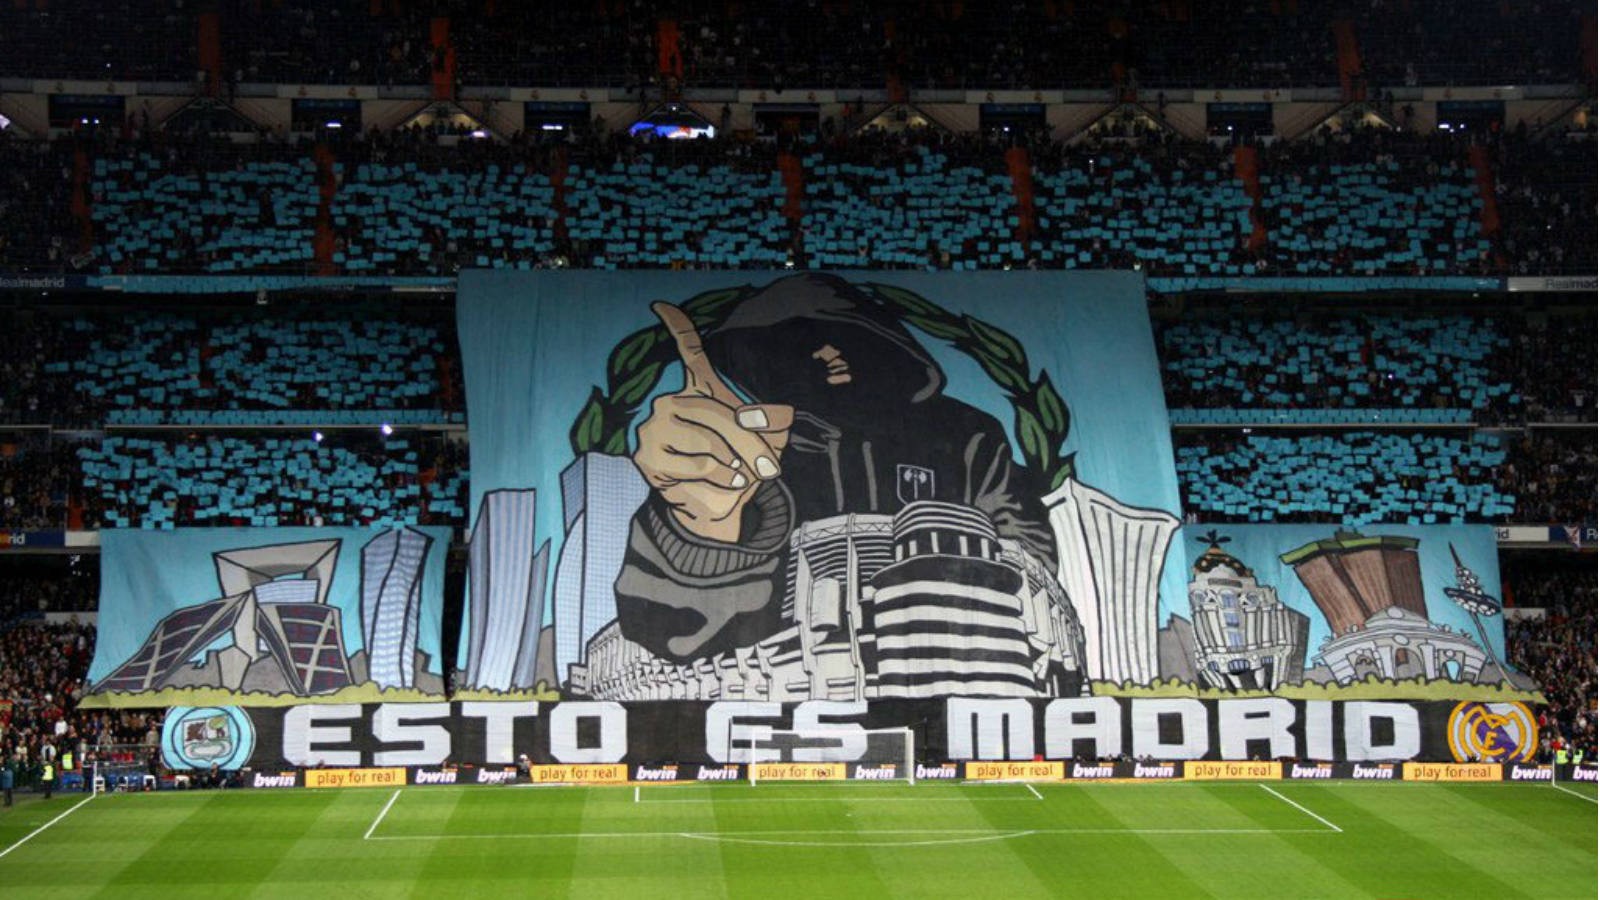 General 1600x900 Real Madrid supporters stadium soccer